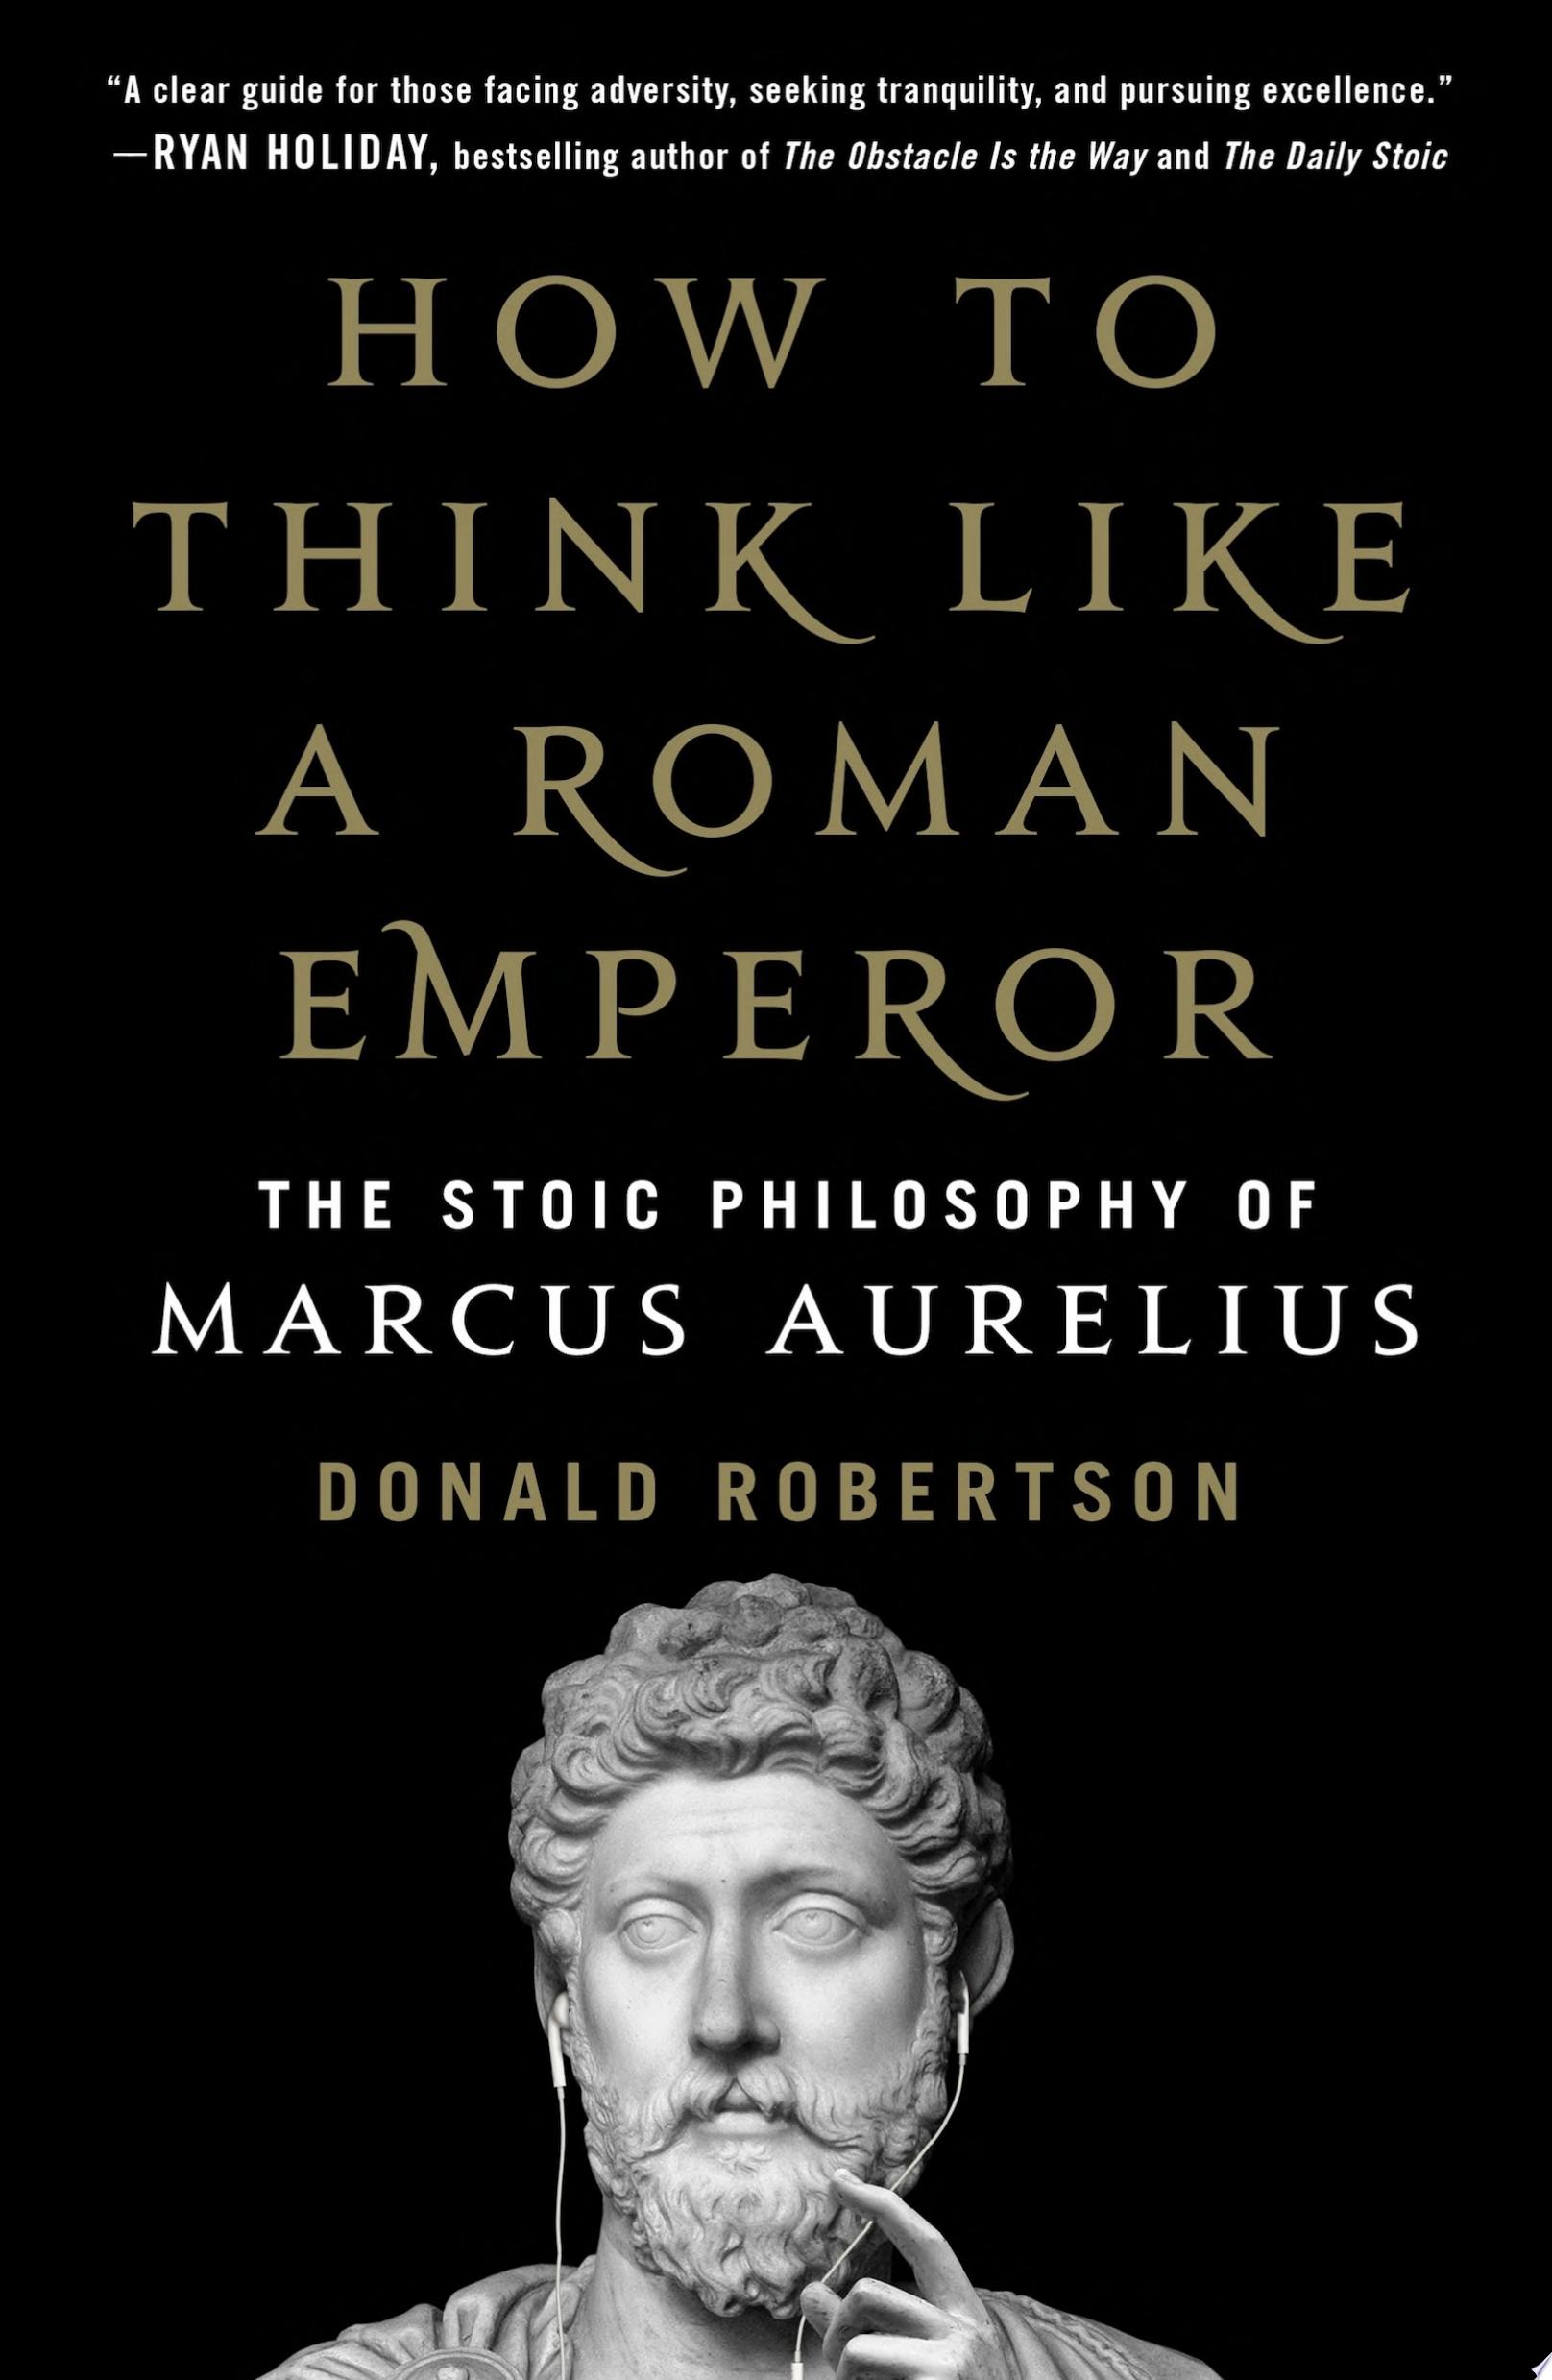 Image for "How to Think Like a Roman Emperor"